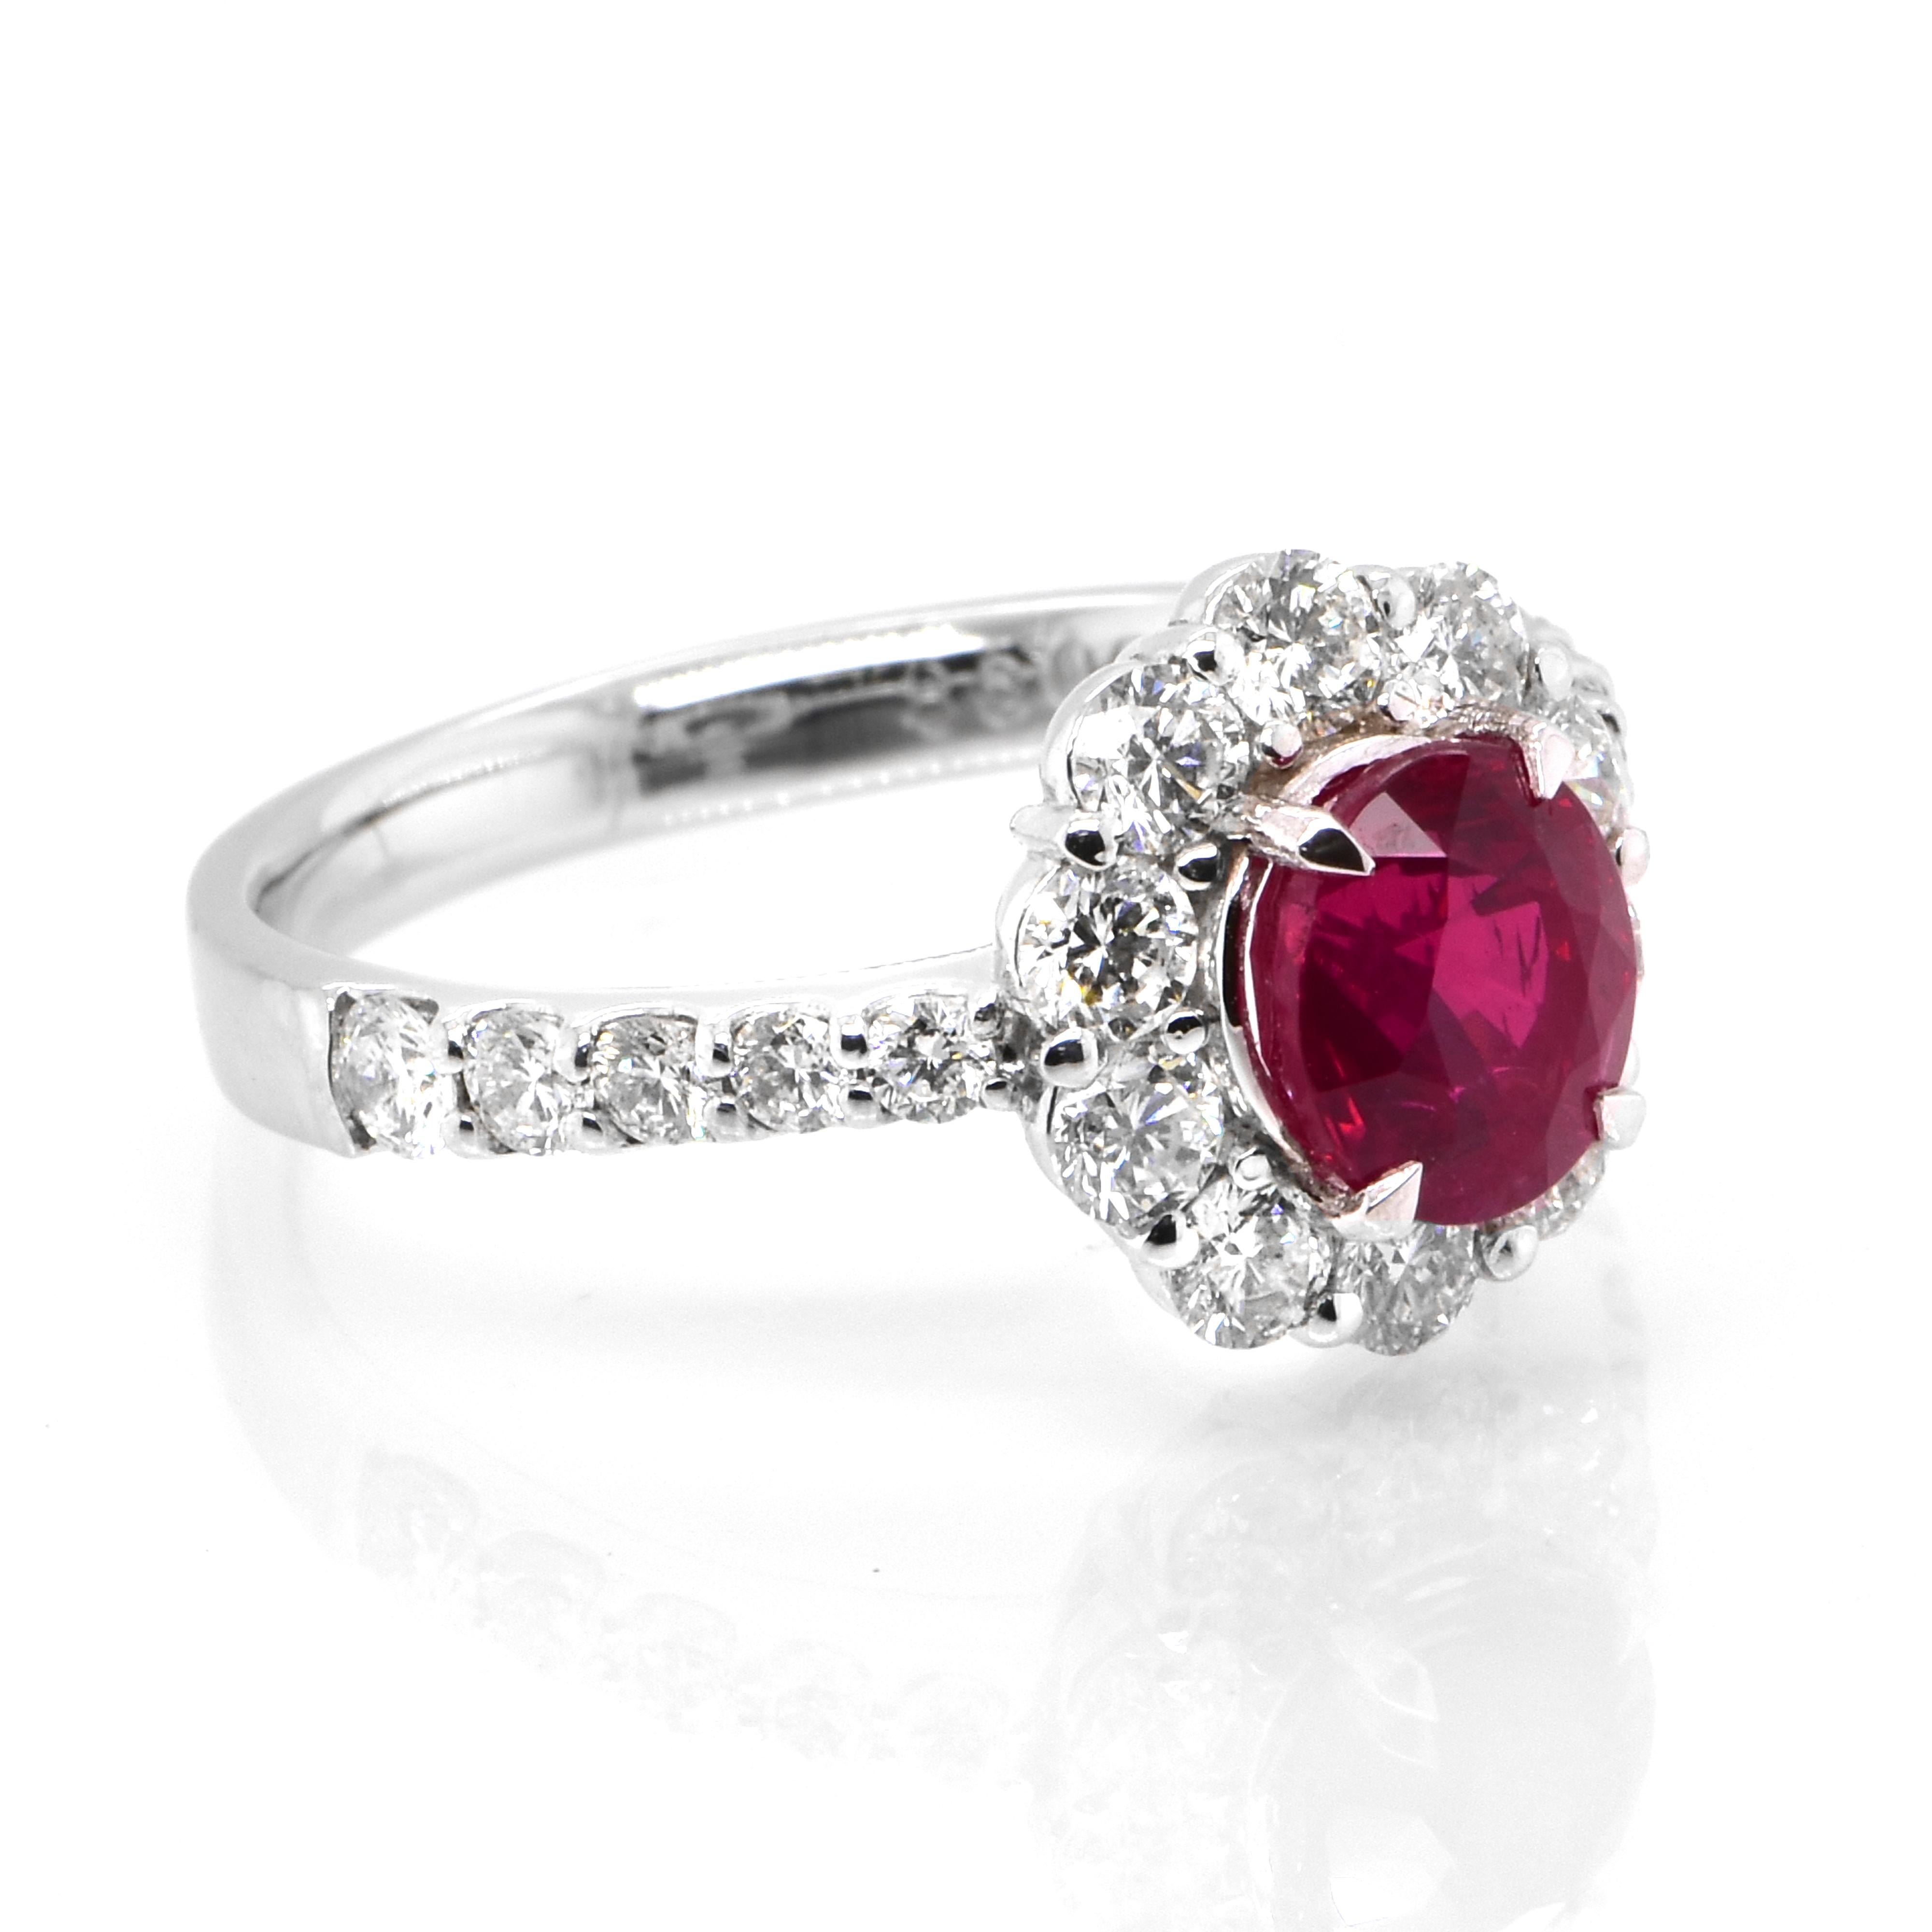 A beautiful Ring set in Platinum featuring a GIA Certified 1.54 Carat Natural Mozambican, Untreated (No Heat) Ruby and 0.98 Carat Diamonds. Rubies are referred to as 